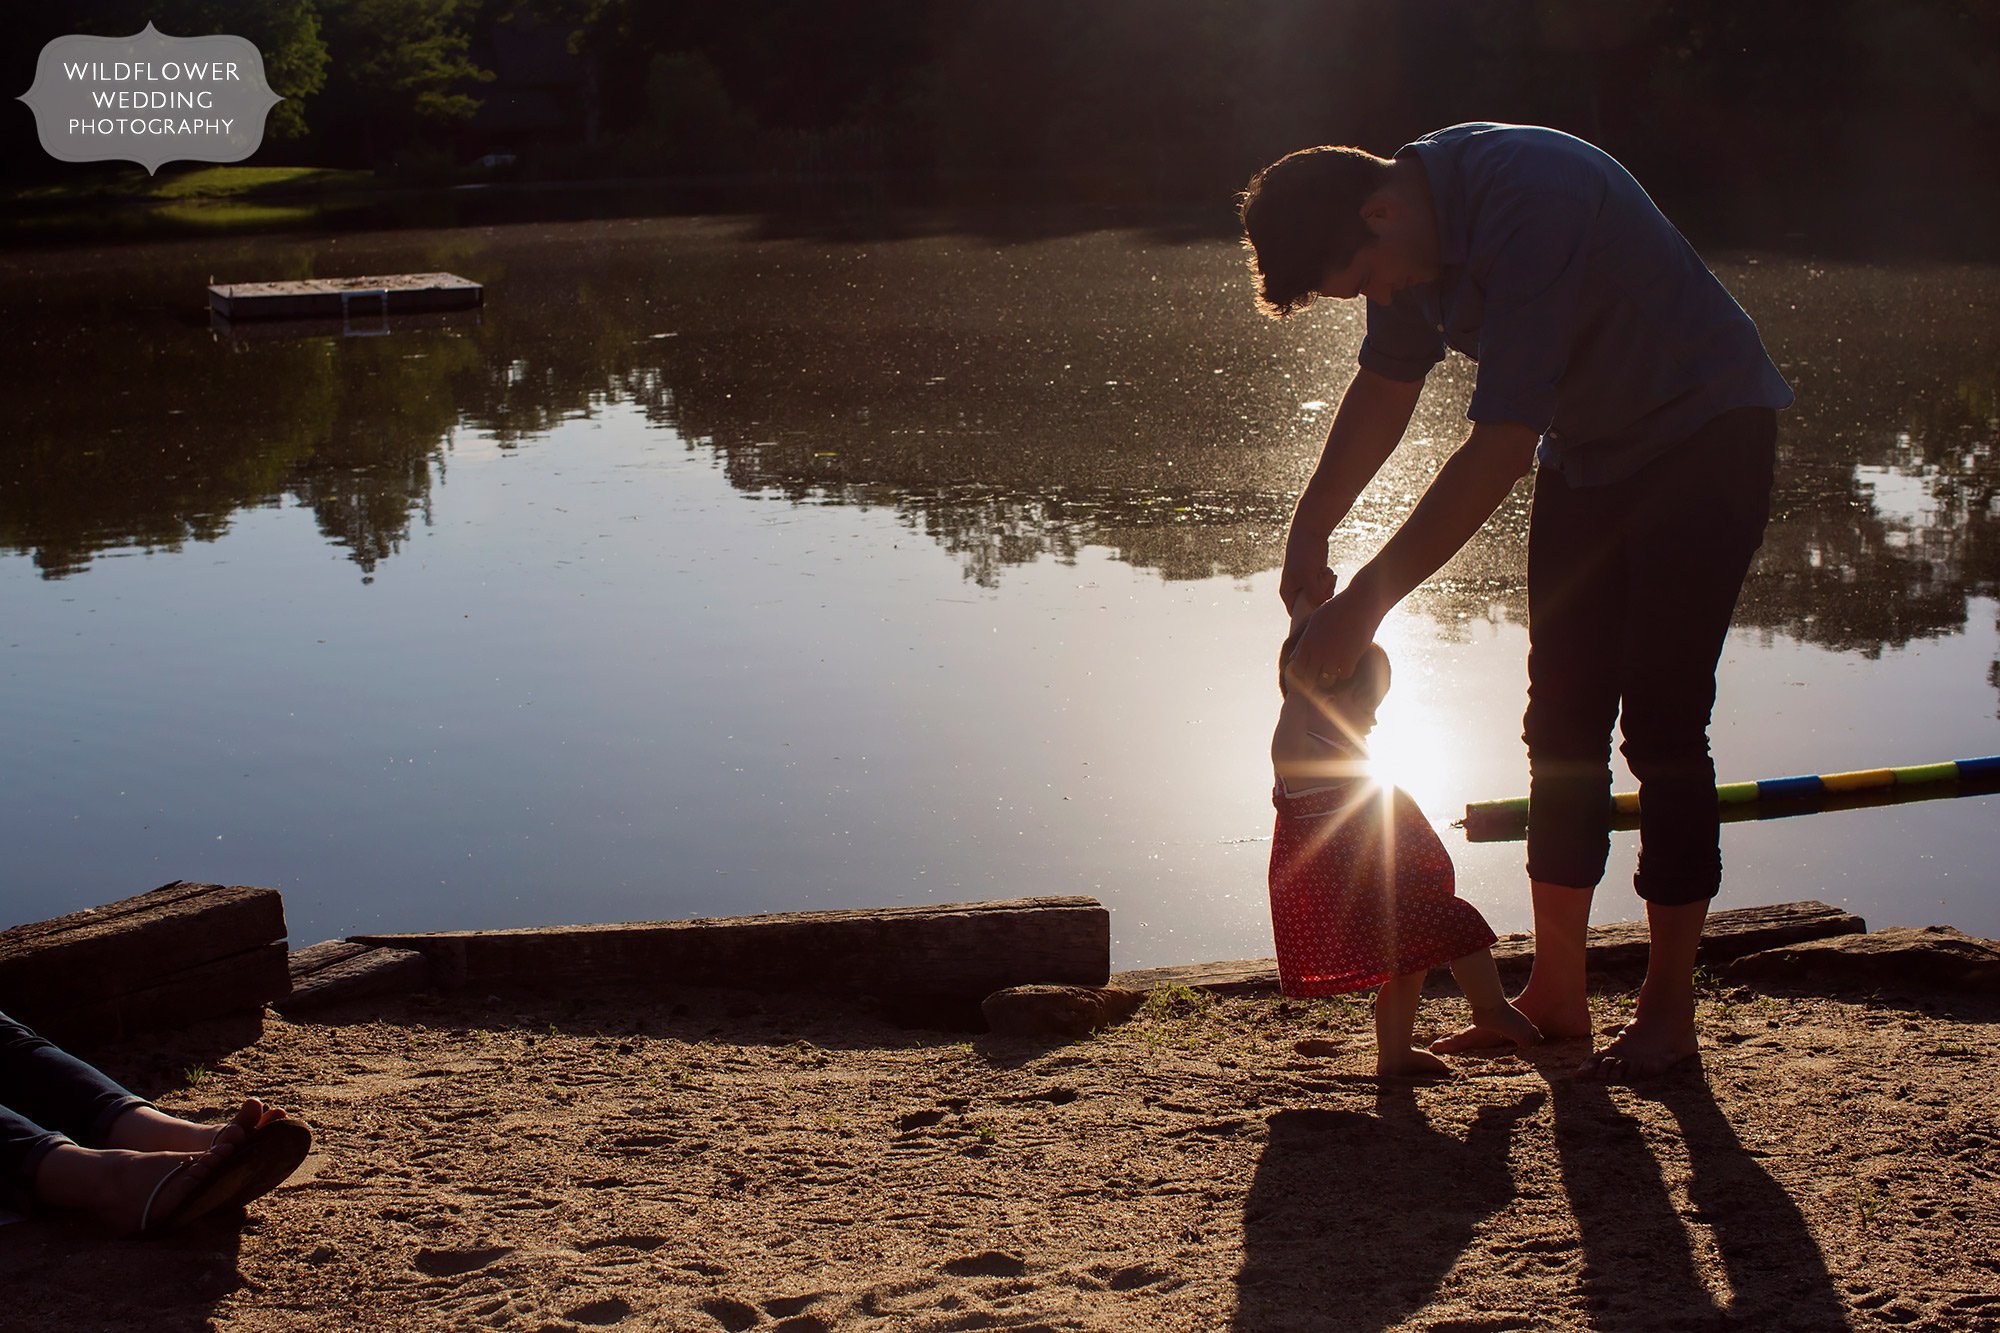 Artsy photo of a dad helping his baby walk at dusk with a sunbursty sunset light.